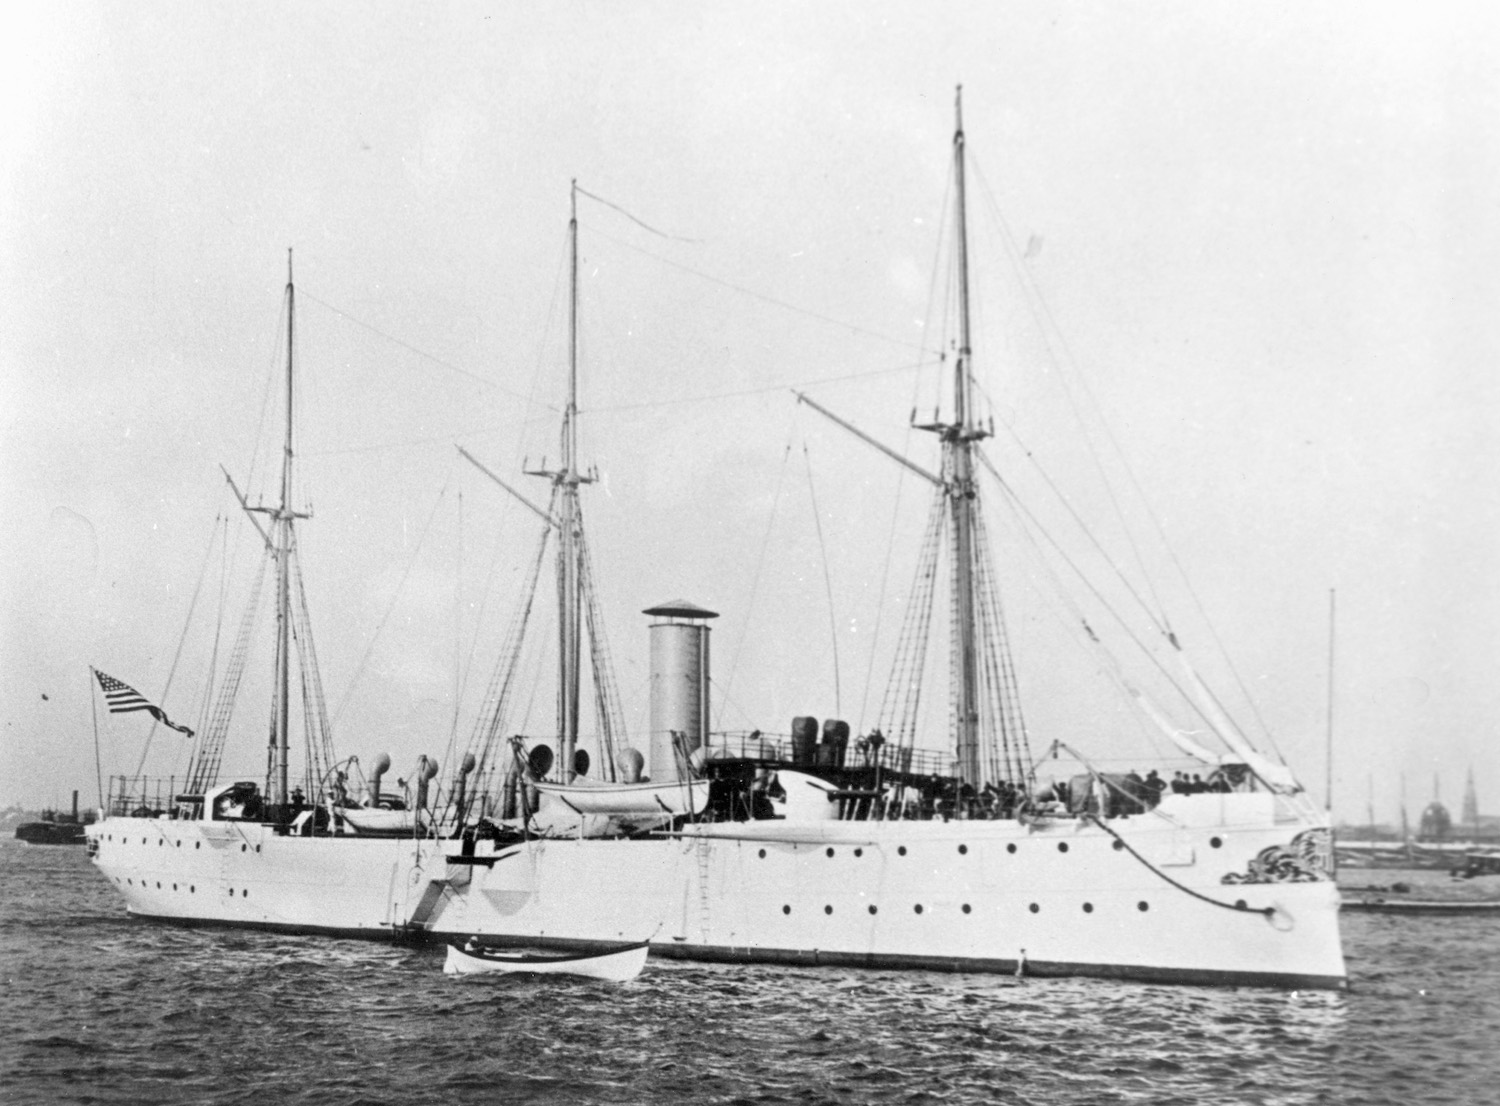 The gunboat Concord.